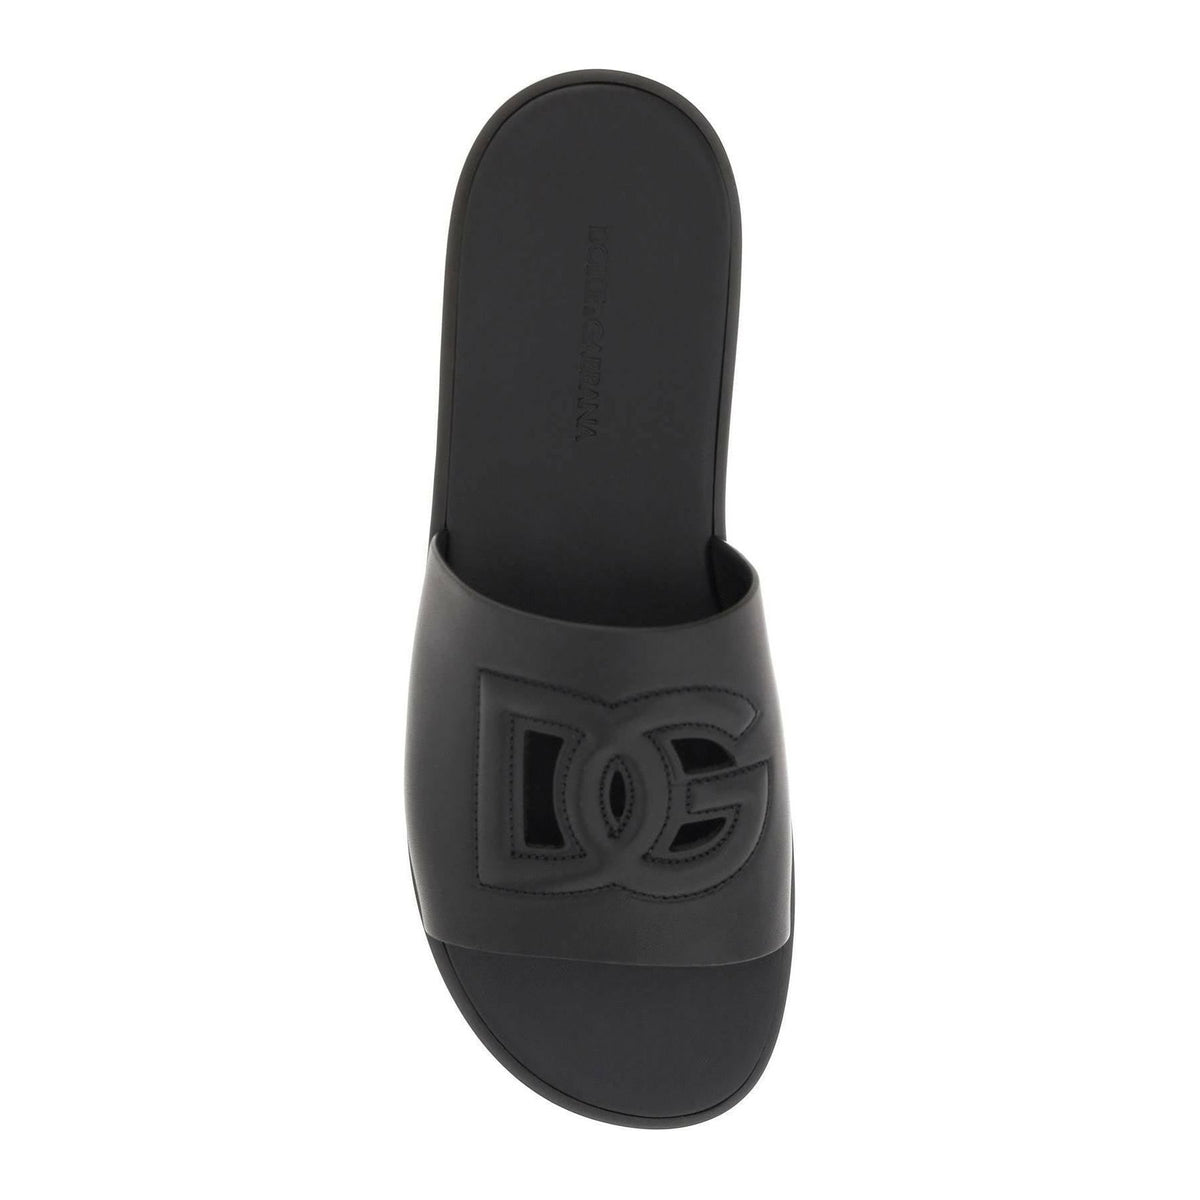 Black Leather Slides With Quilted Dg Cut Out DOLCE & GABBANA JOHN JULIA.